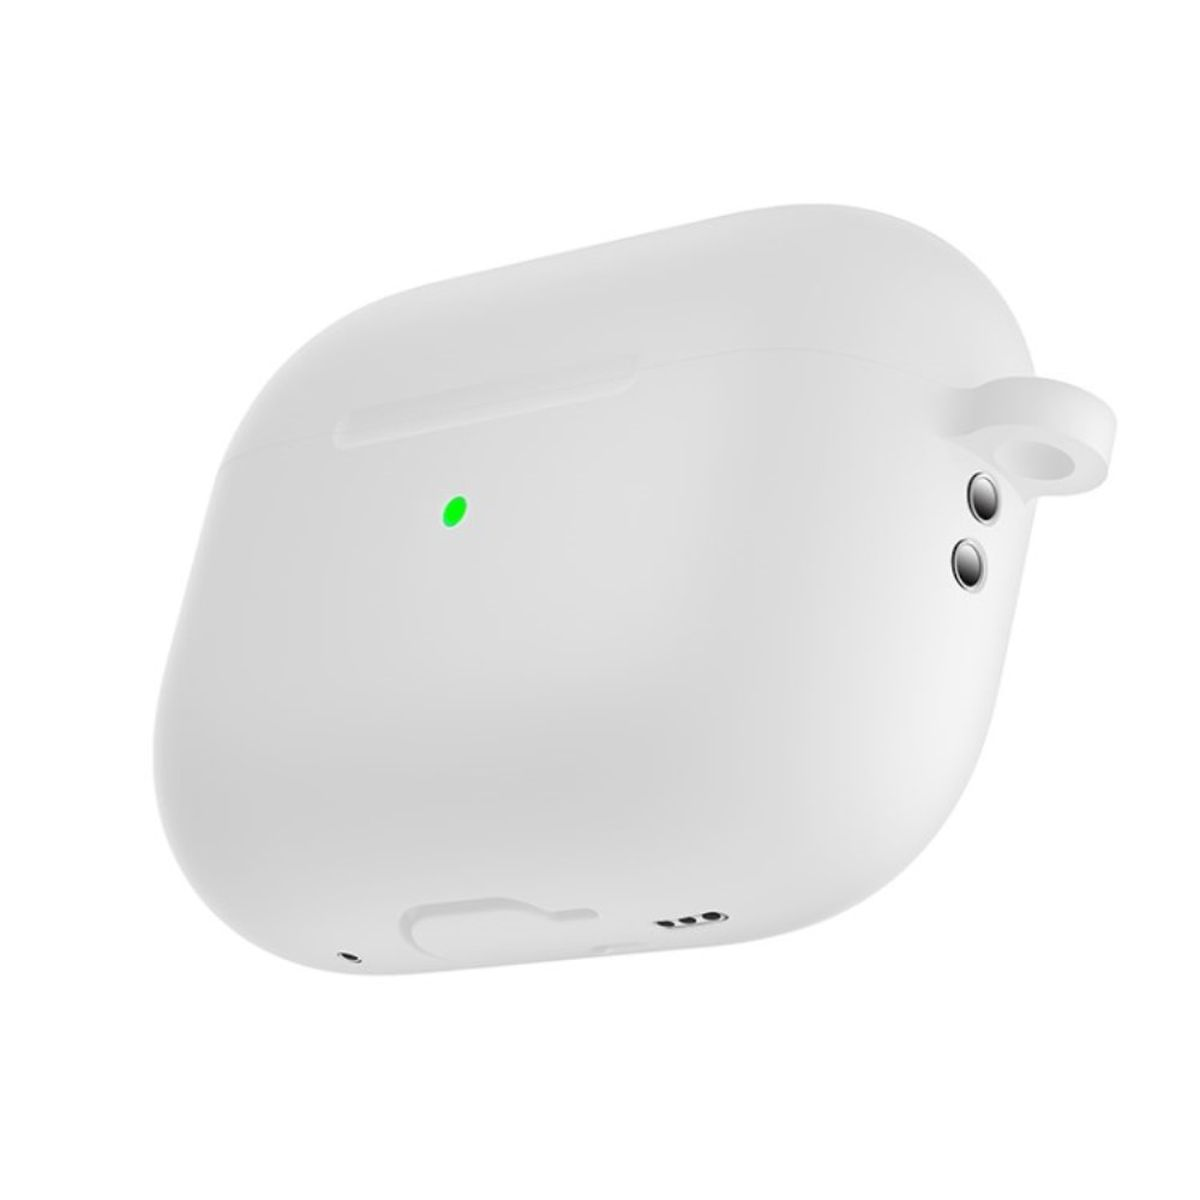 Ladecase für Apple Pro 2 COVERKINGZ Silikoncover weiß, 77379 Airpods